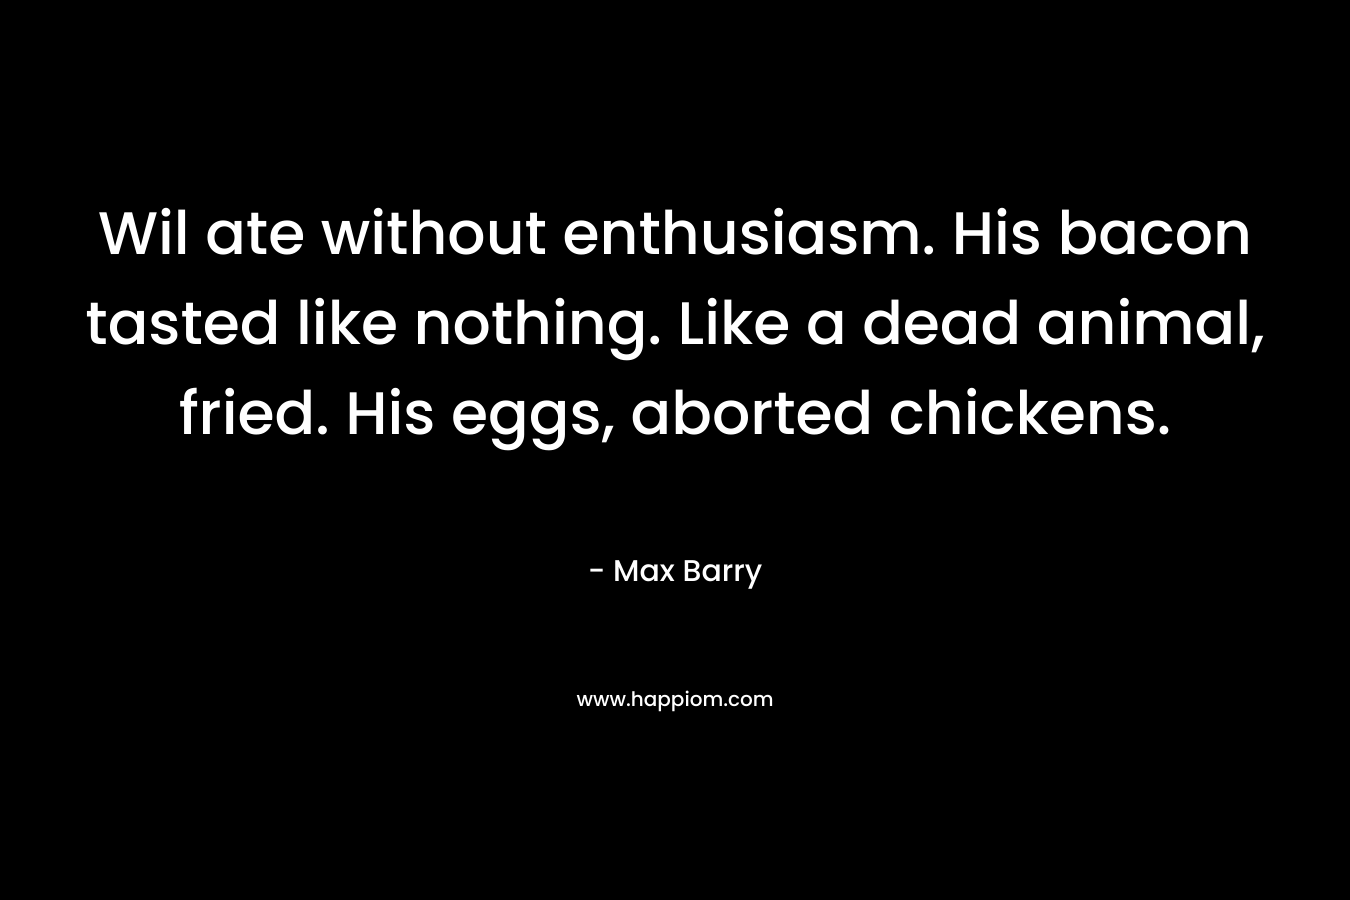 Wil ate without enthusiasm. His bacon tasted like nothing. Like a dead animal, fried. His eggs, aborted chickens. – Max Barry